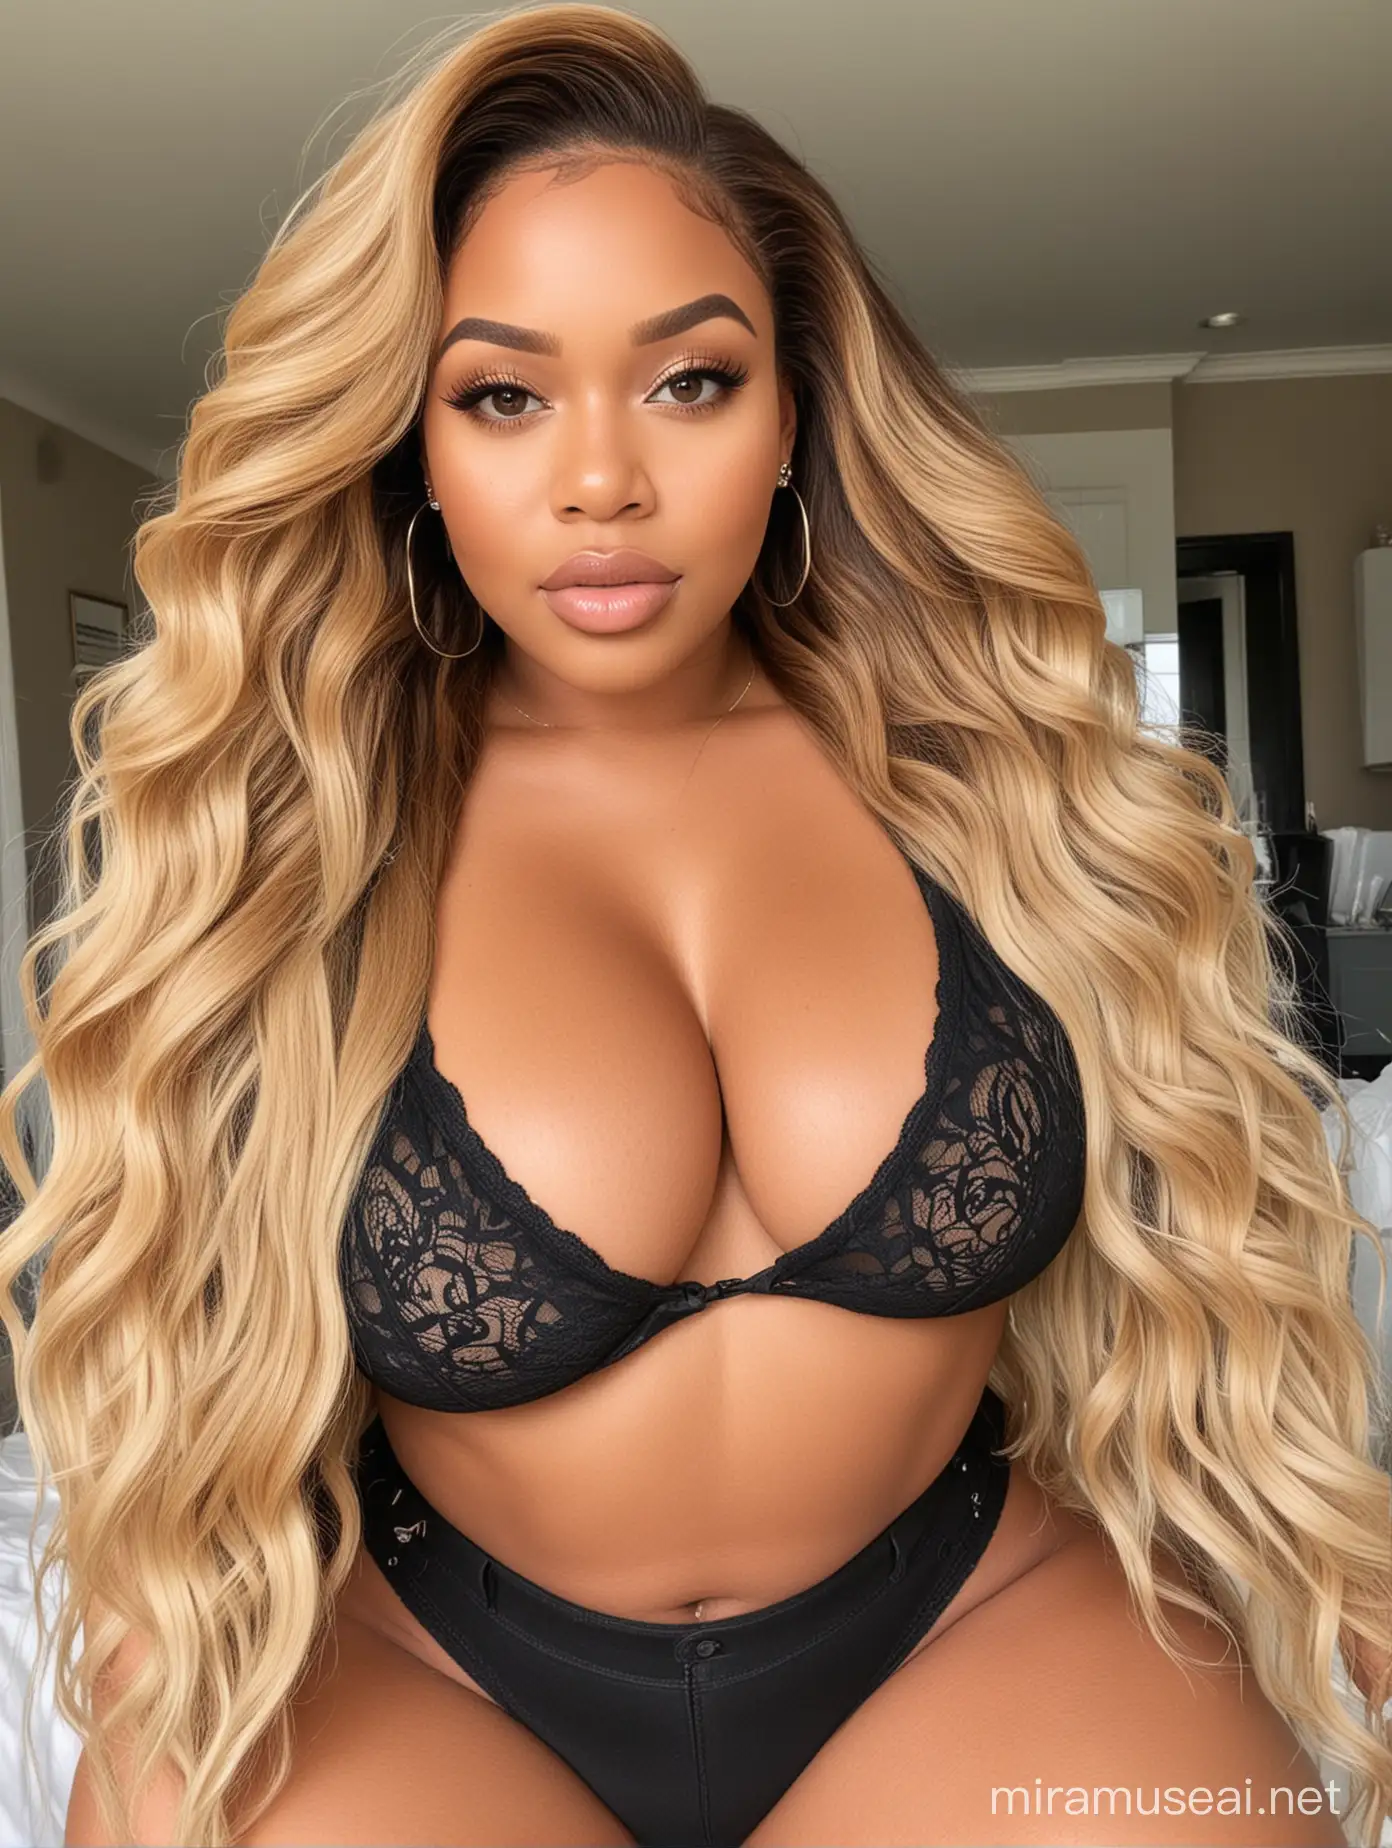 Image prompt/: generate pictures full body of a light skinned south african very curvaceous, thick girl that looks like me, with a straight brunette hd lace front weave, thirst trap head to toe.